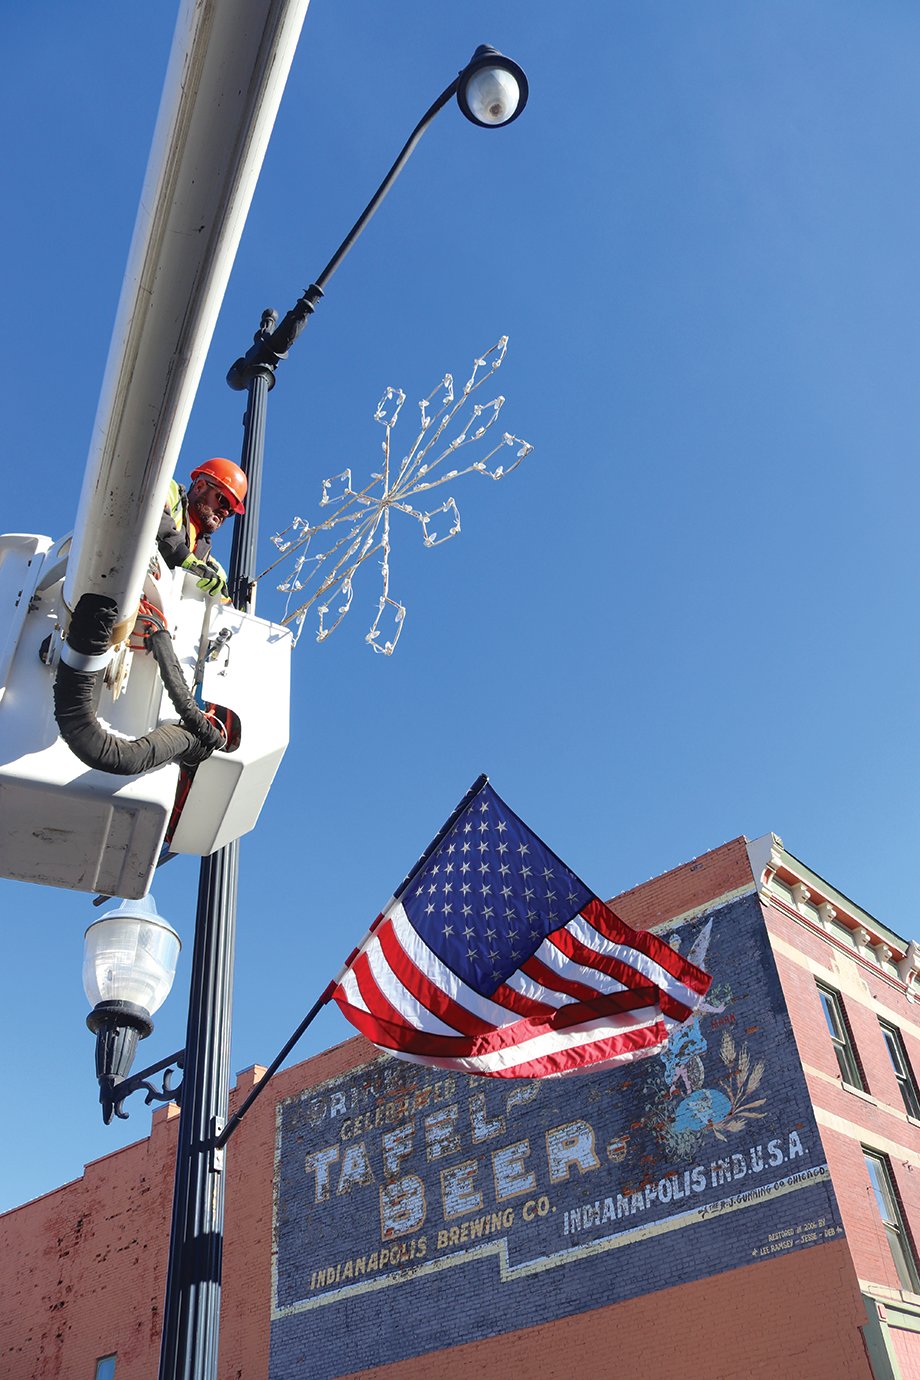 City employee Tom Edwards completes the installation of a holiday snowflake onto the side of a Main Street light pole Tuesday in downtown Crawfordsville.